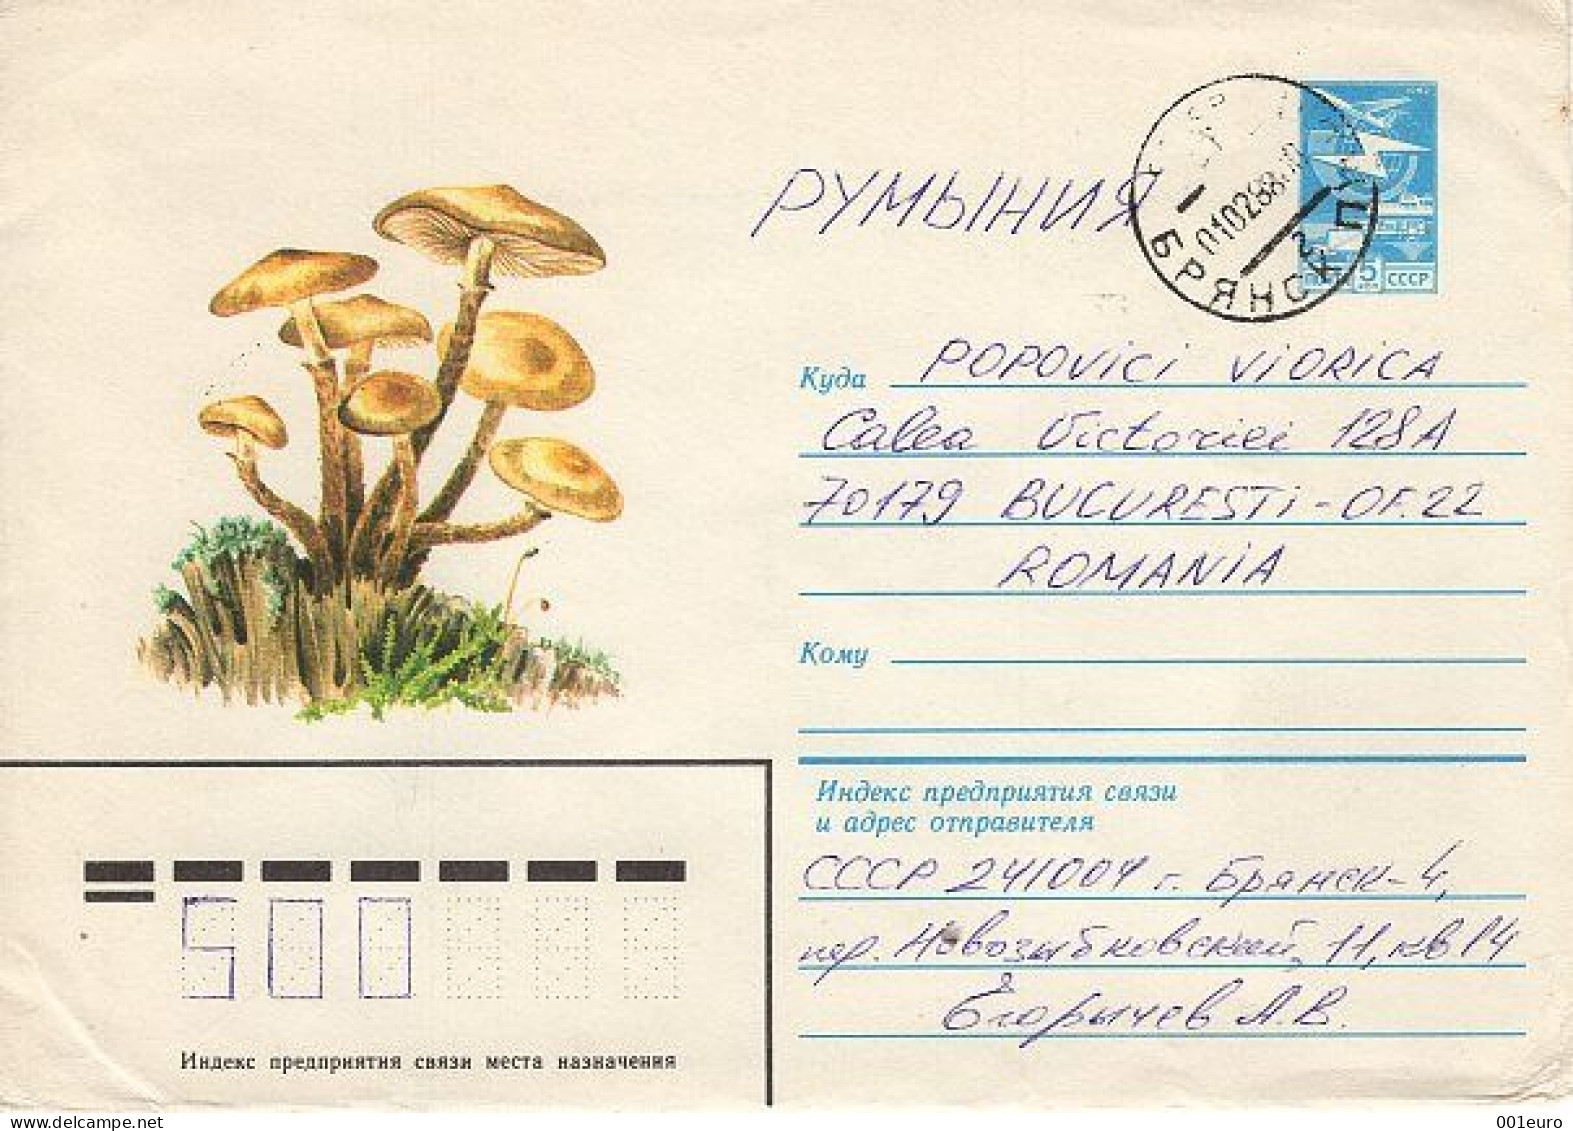 RUSSIA [USSR]: 1983 MUSHROOMS Used Prepaid Postal Stationery Cover - Registered Shipping! - 1980-91